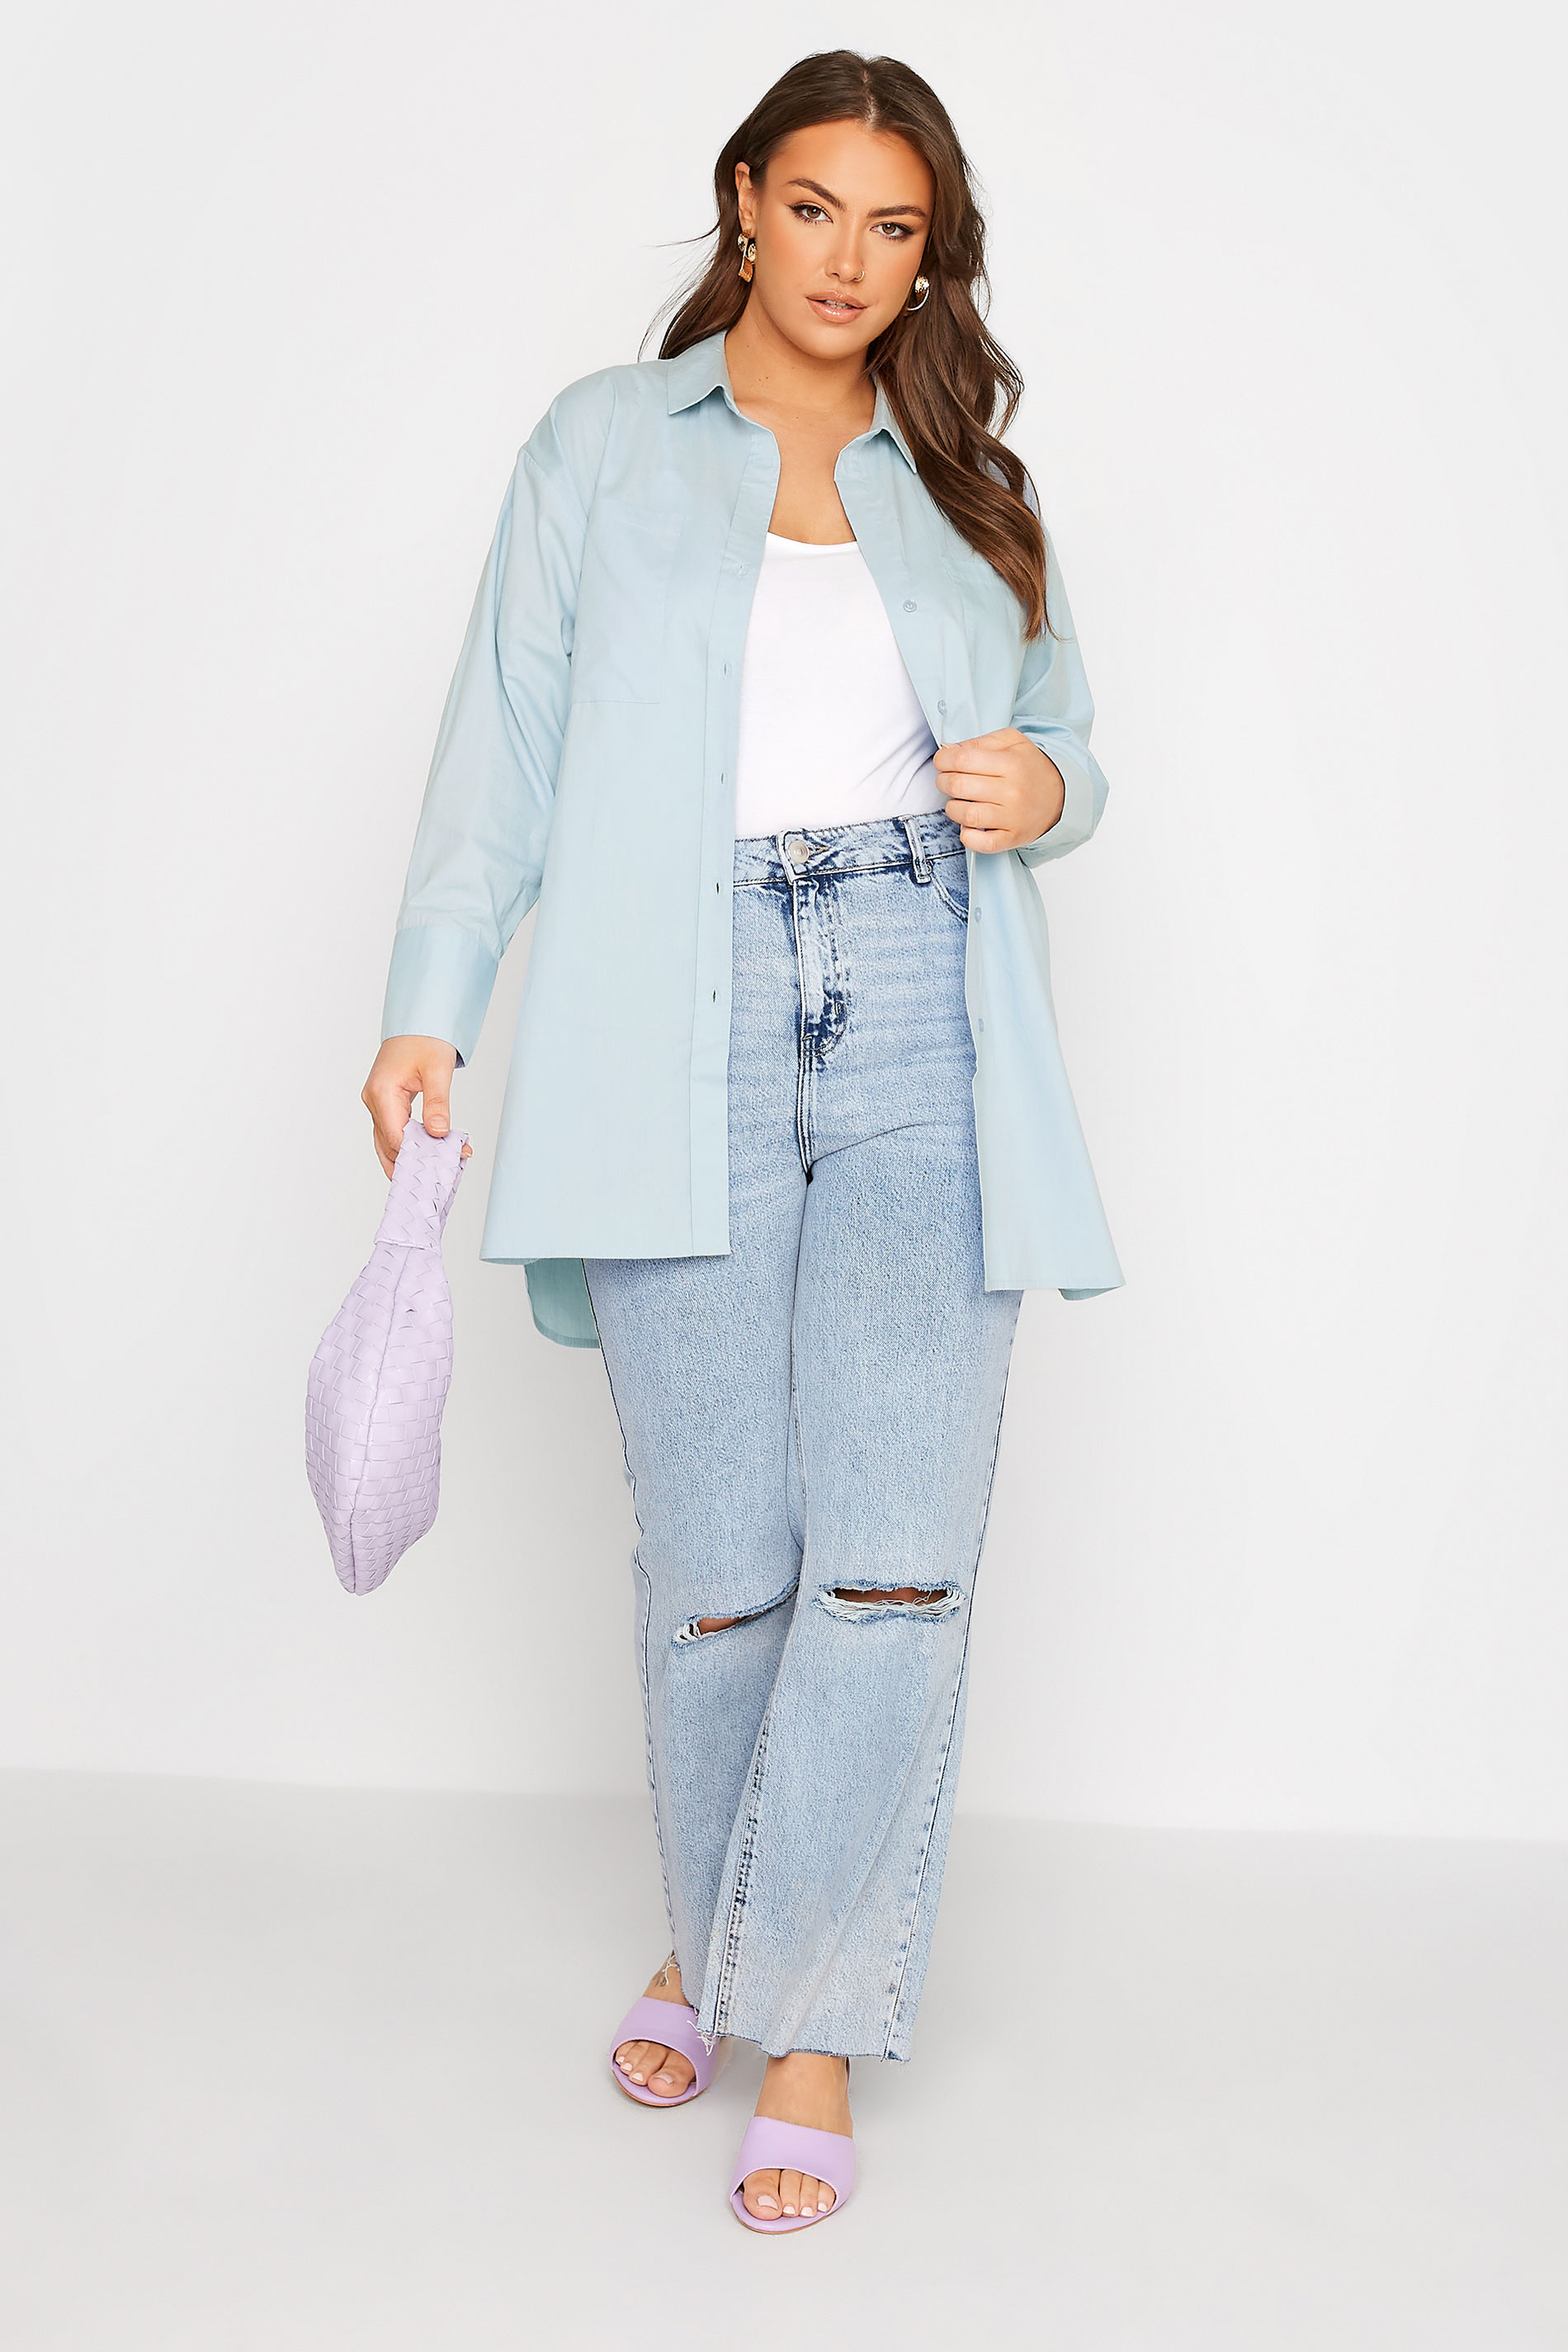 Grande taille  Tops Grande taille  Blouses & Chemisiers | LIMITED COLLECTION - Chemisier Bleu Pastel Oversize Boyfriend - NX20611